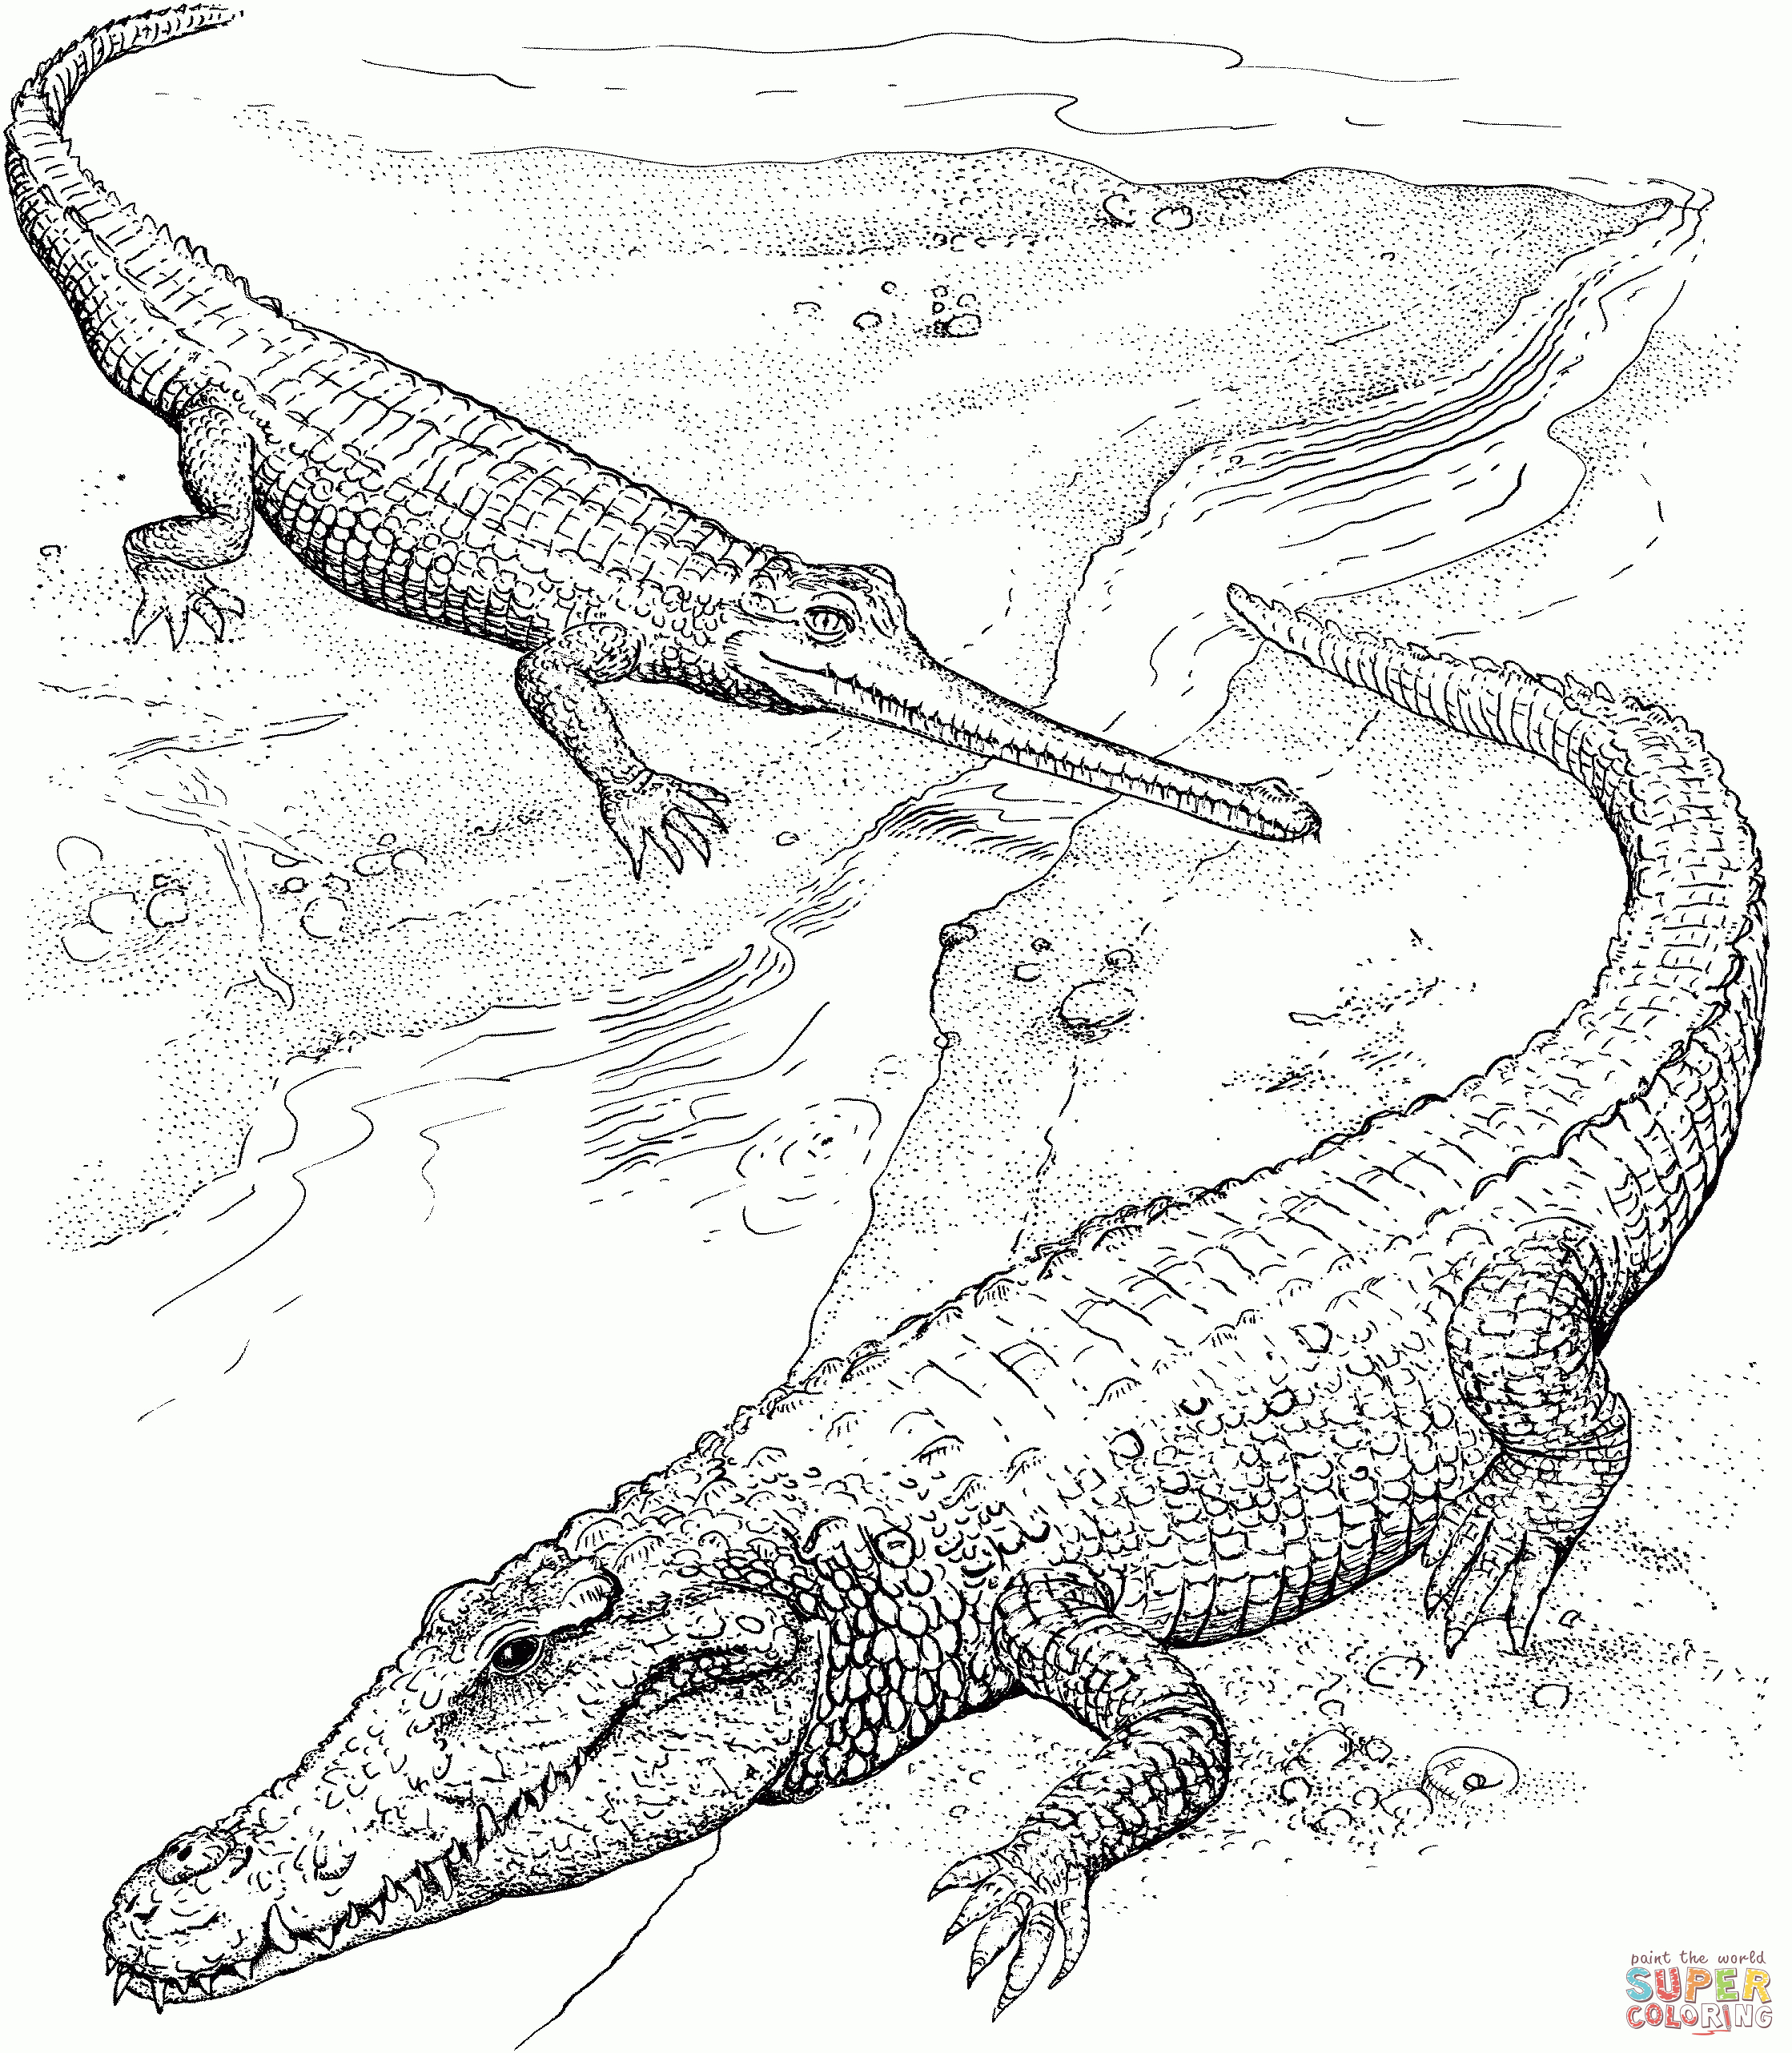 American Crocodile And Indian Gharial Coloring Page | Free Printable - Free Printable Pictures Of Crocodiles